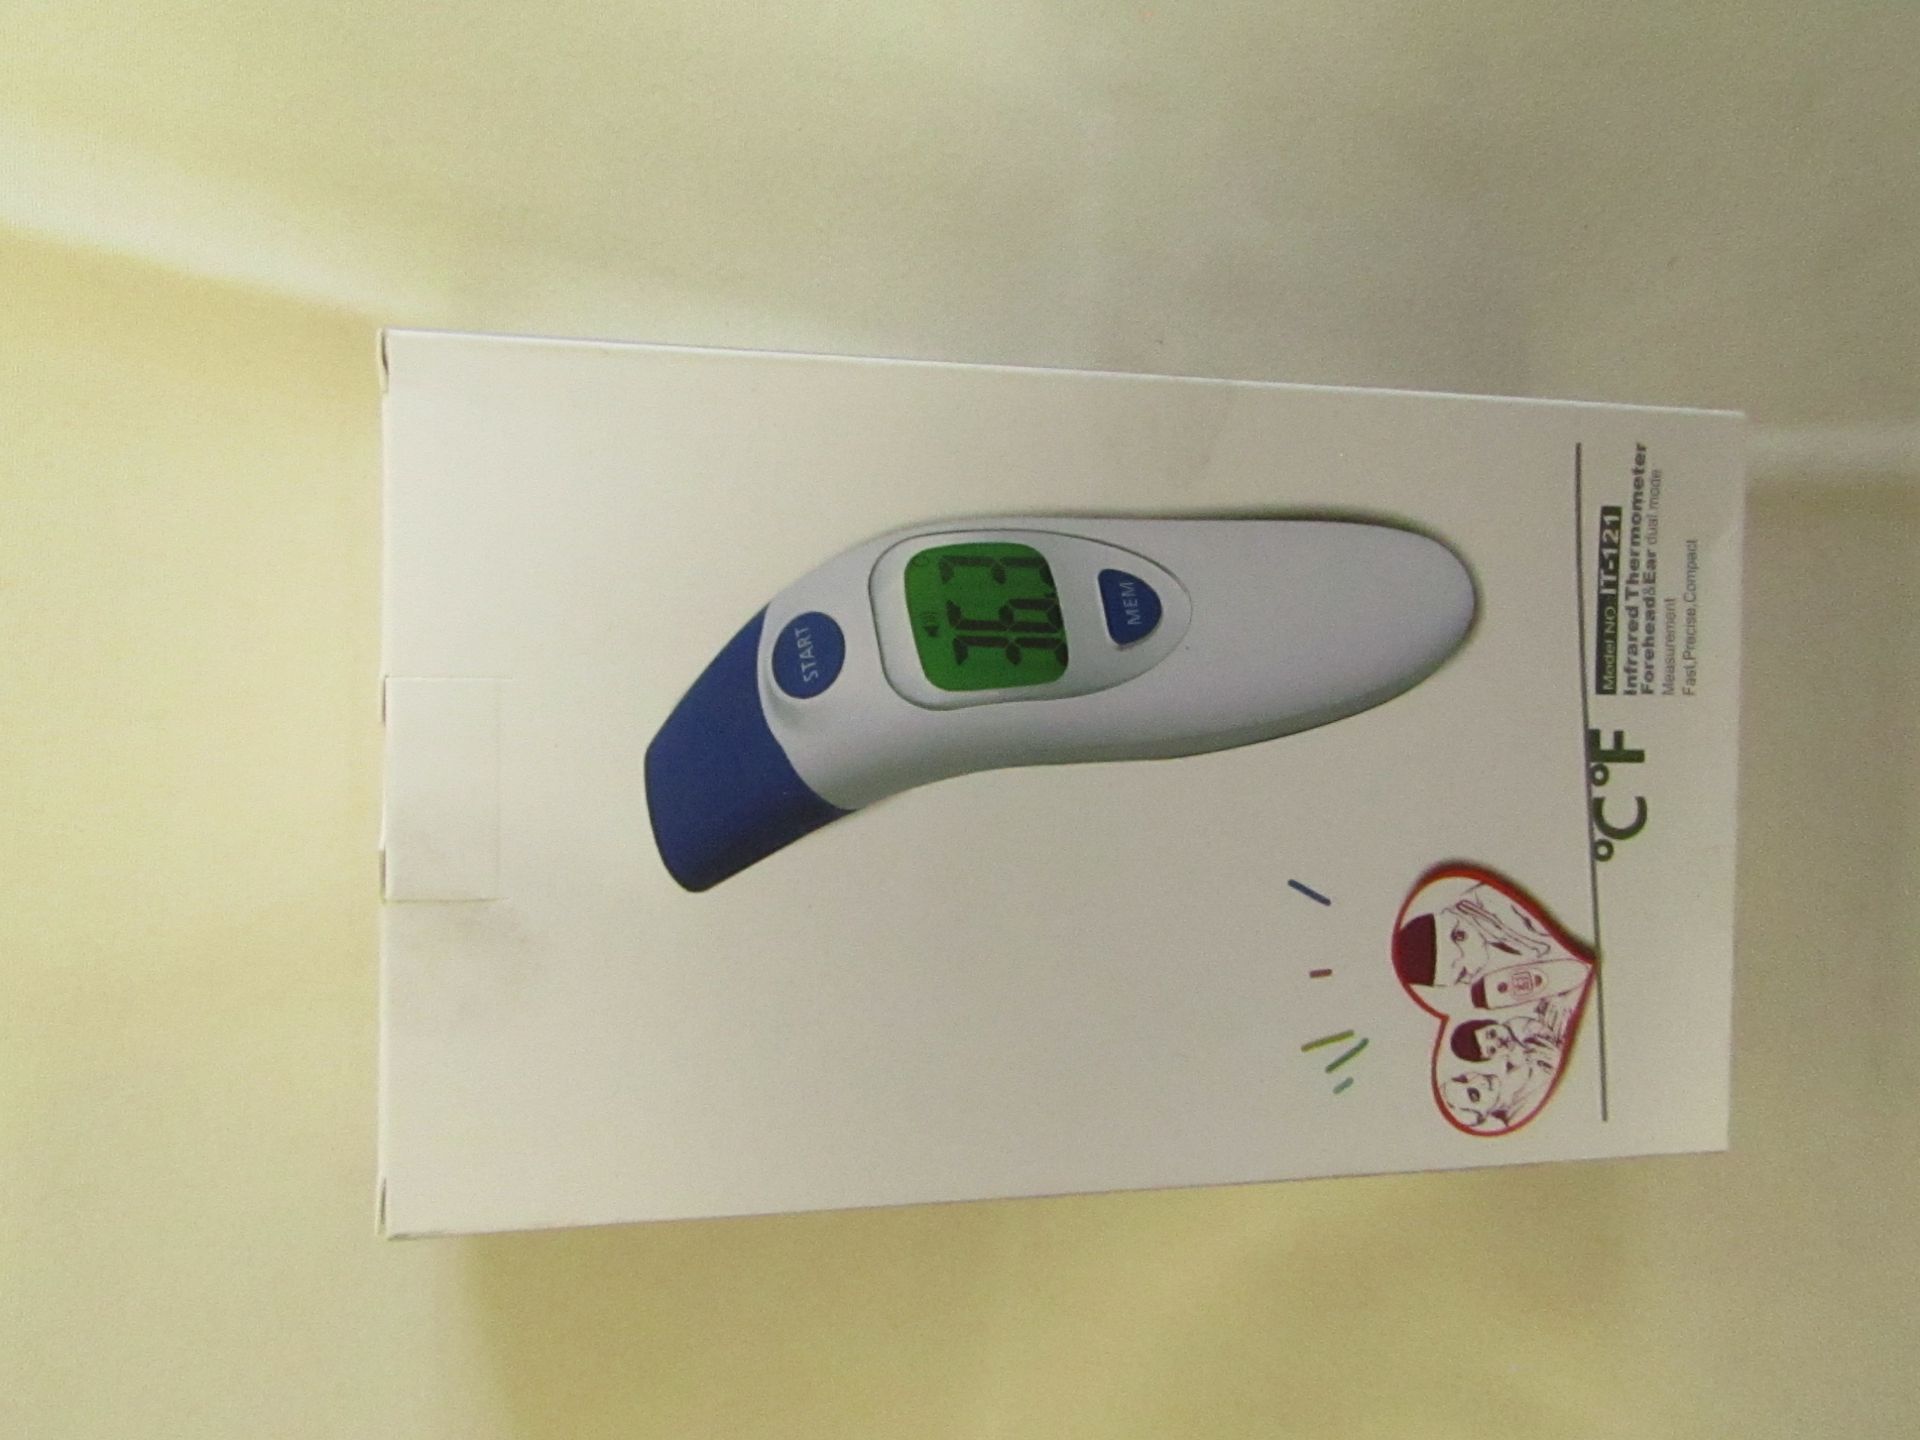 Electronic LCD Digital Baby Thermometer Battery Operated IR Infrared Ear Thermometer Body